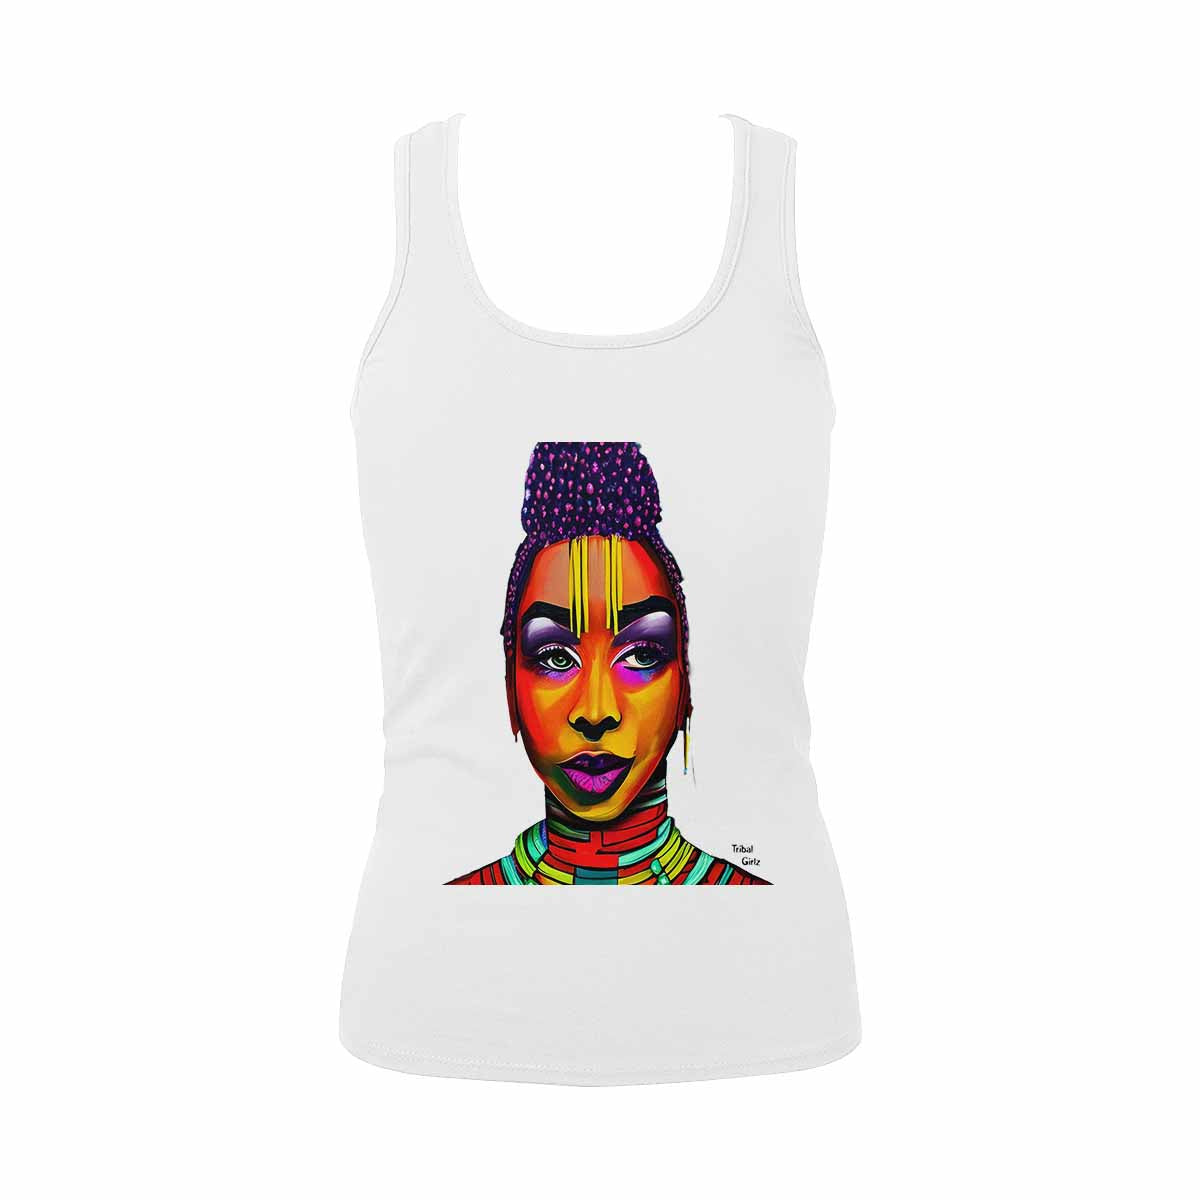 Dreads & Braids, WHITE tank top, cotton, african tribal, outline BL, Fulangiara 35